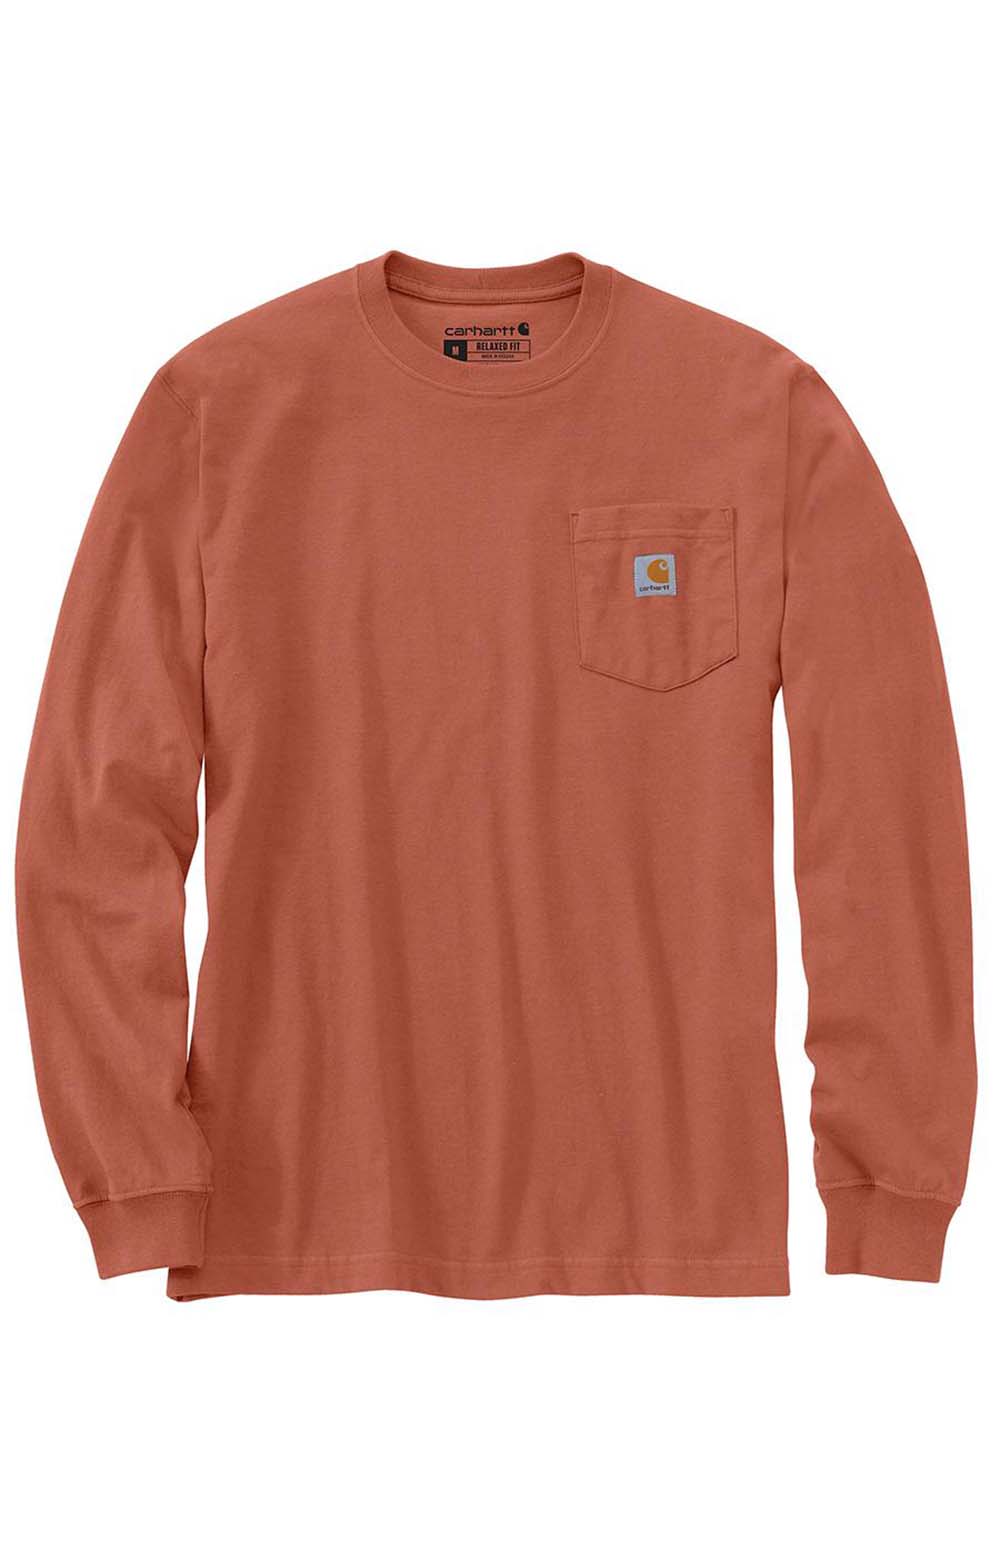 (105955) Relaxed Fit HW L/S Pocket Mountain Graphic T-Shirt - Terracotta